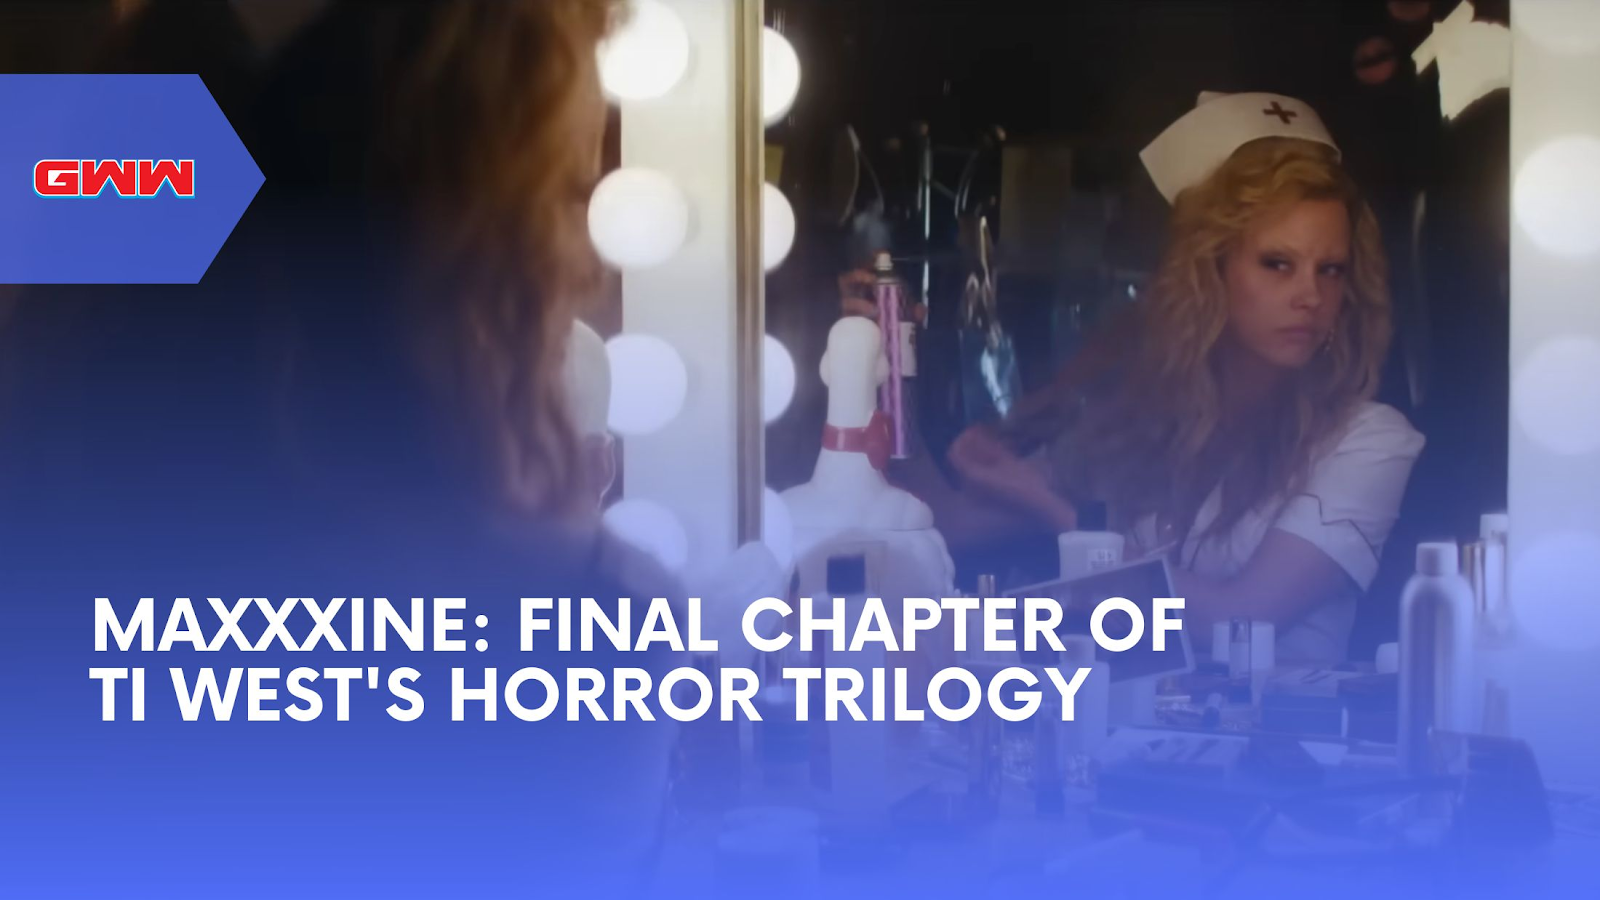 MaXXXine: Final Chapter of Ti West's Horror Trilogy